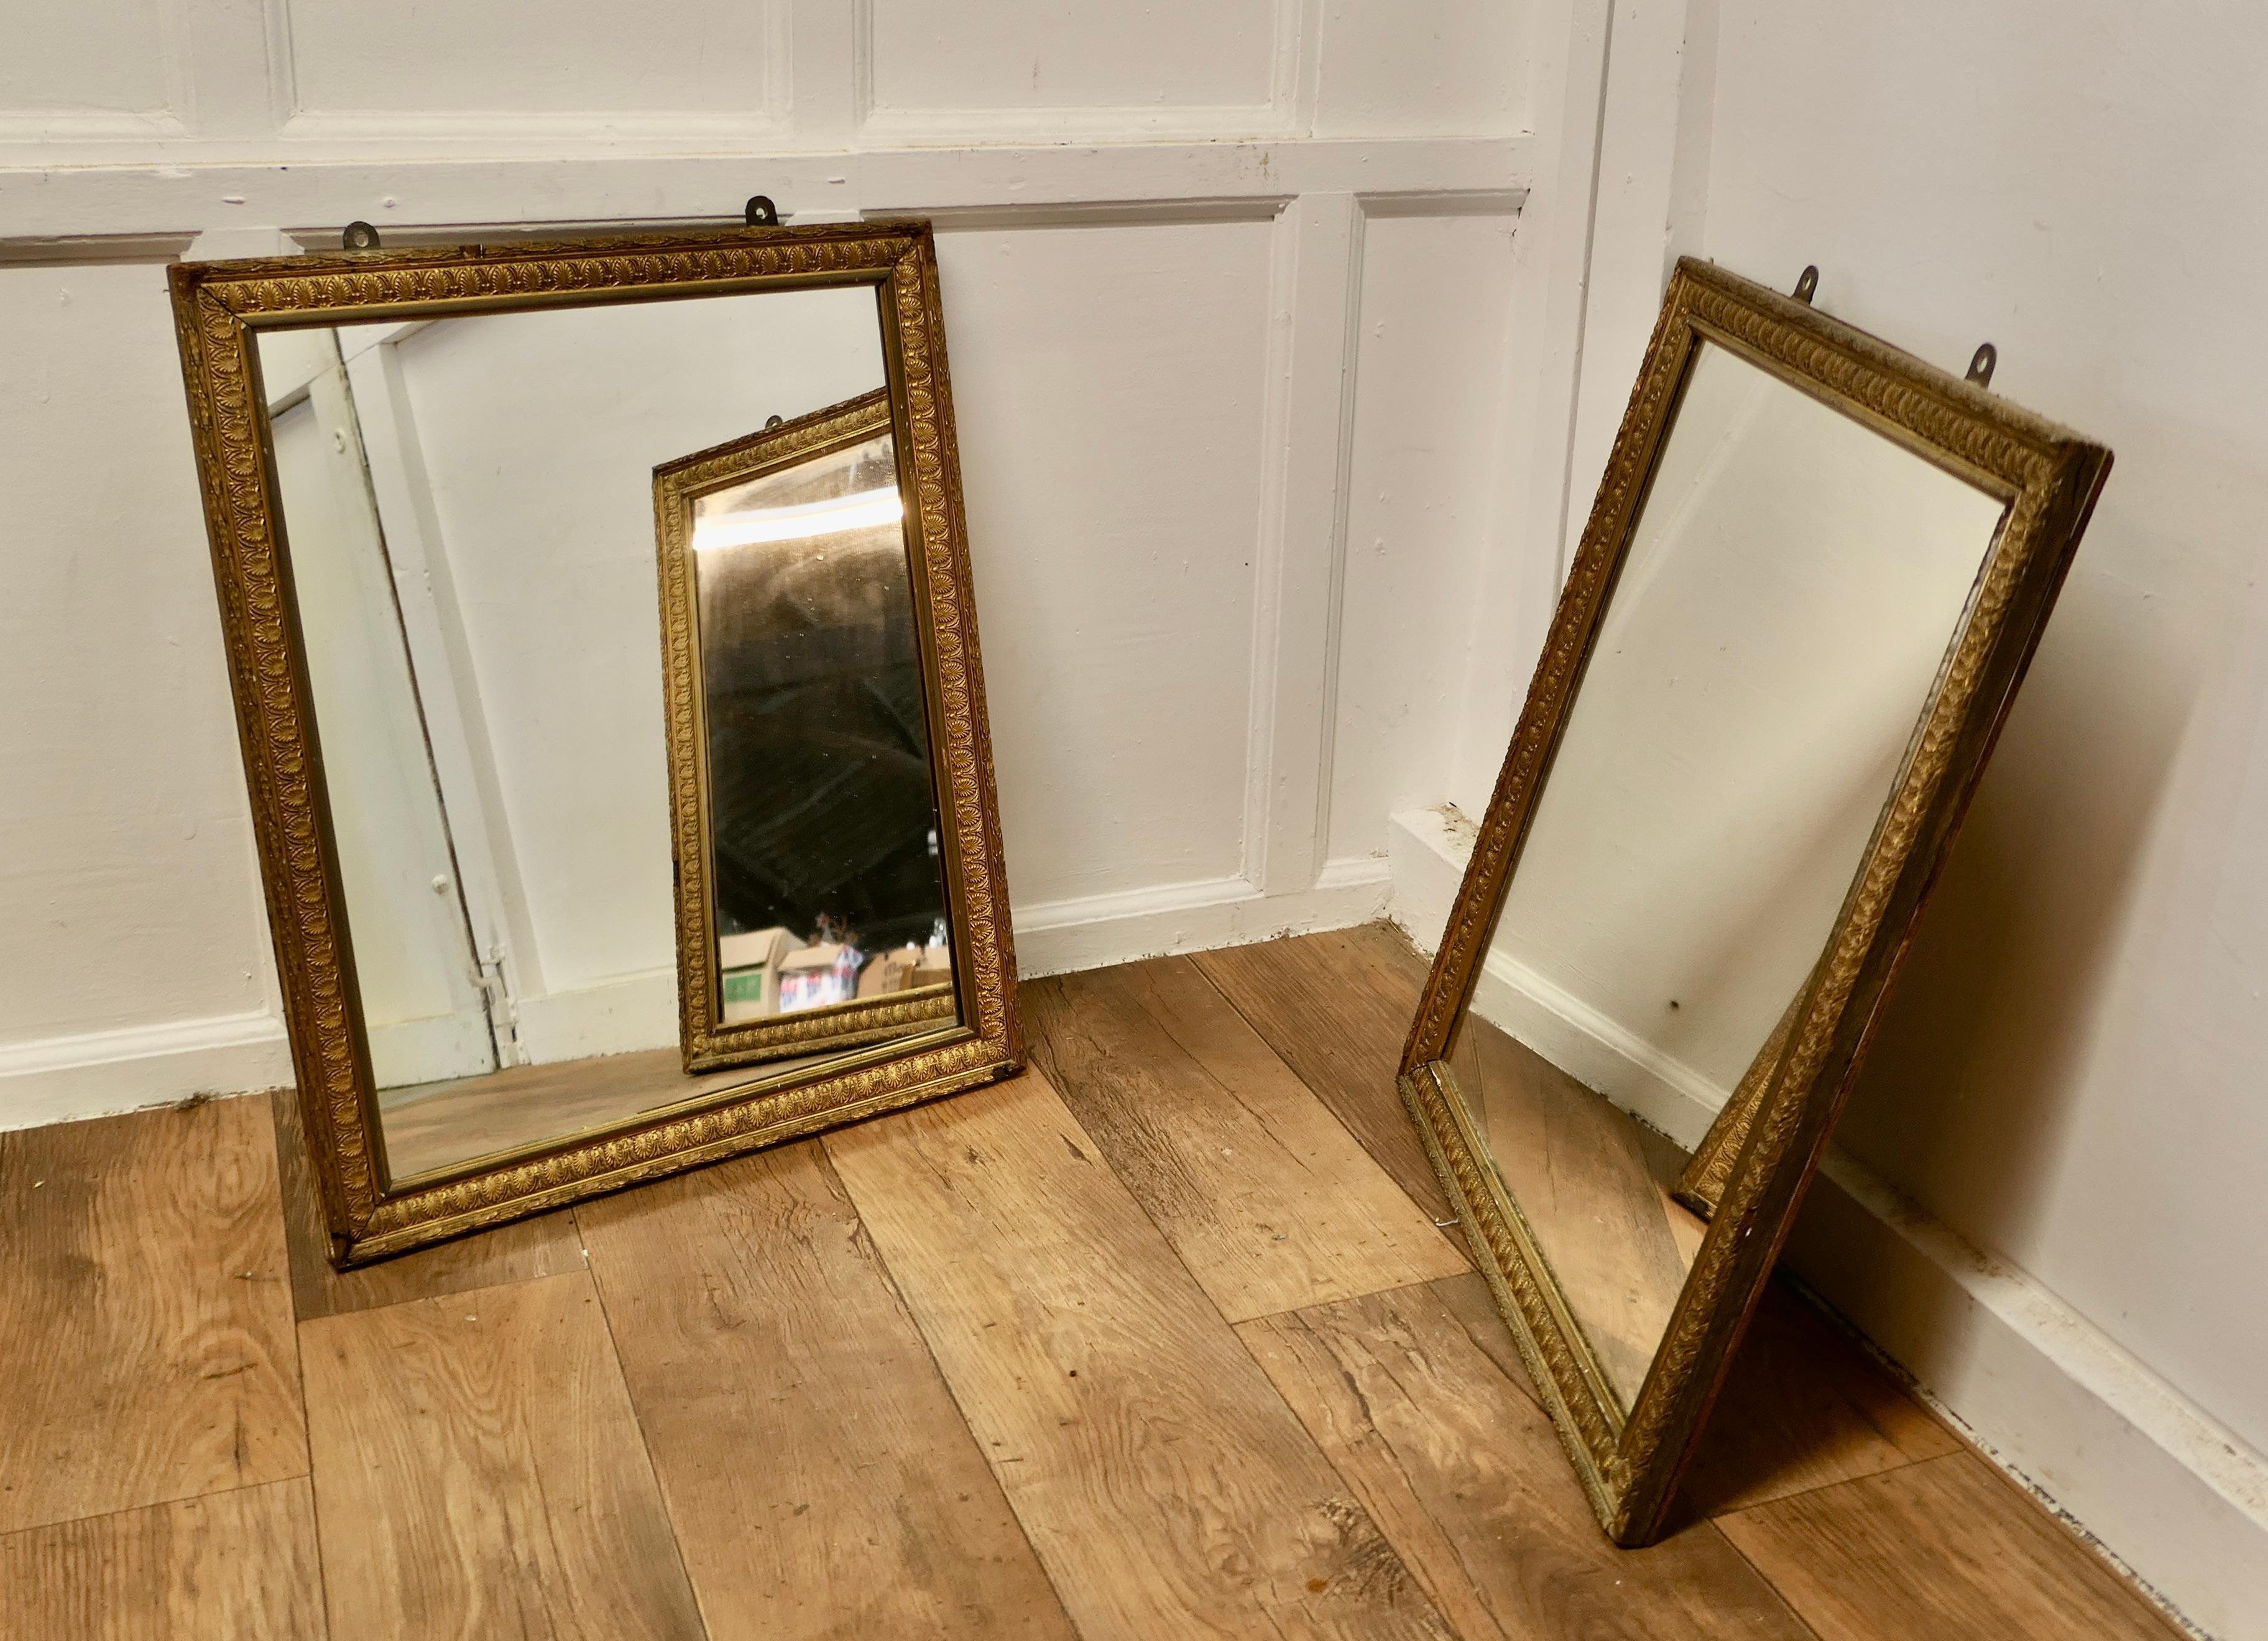 A Pair of Large Gilt Mirrors

The mirrors have lovely age darkened 2” wide moulded Gilt frames, they are in good condition for their age, there is some minor chipping to the gilt frames but nothing serious, these are heavy pieces and they are set